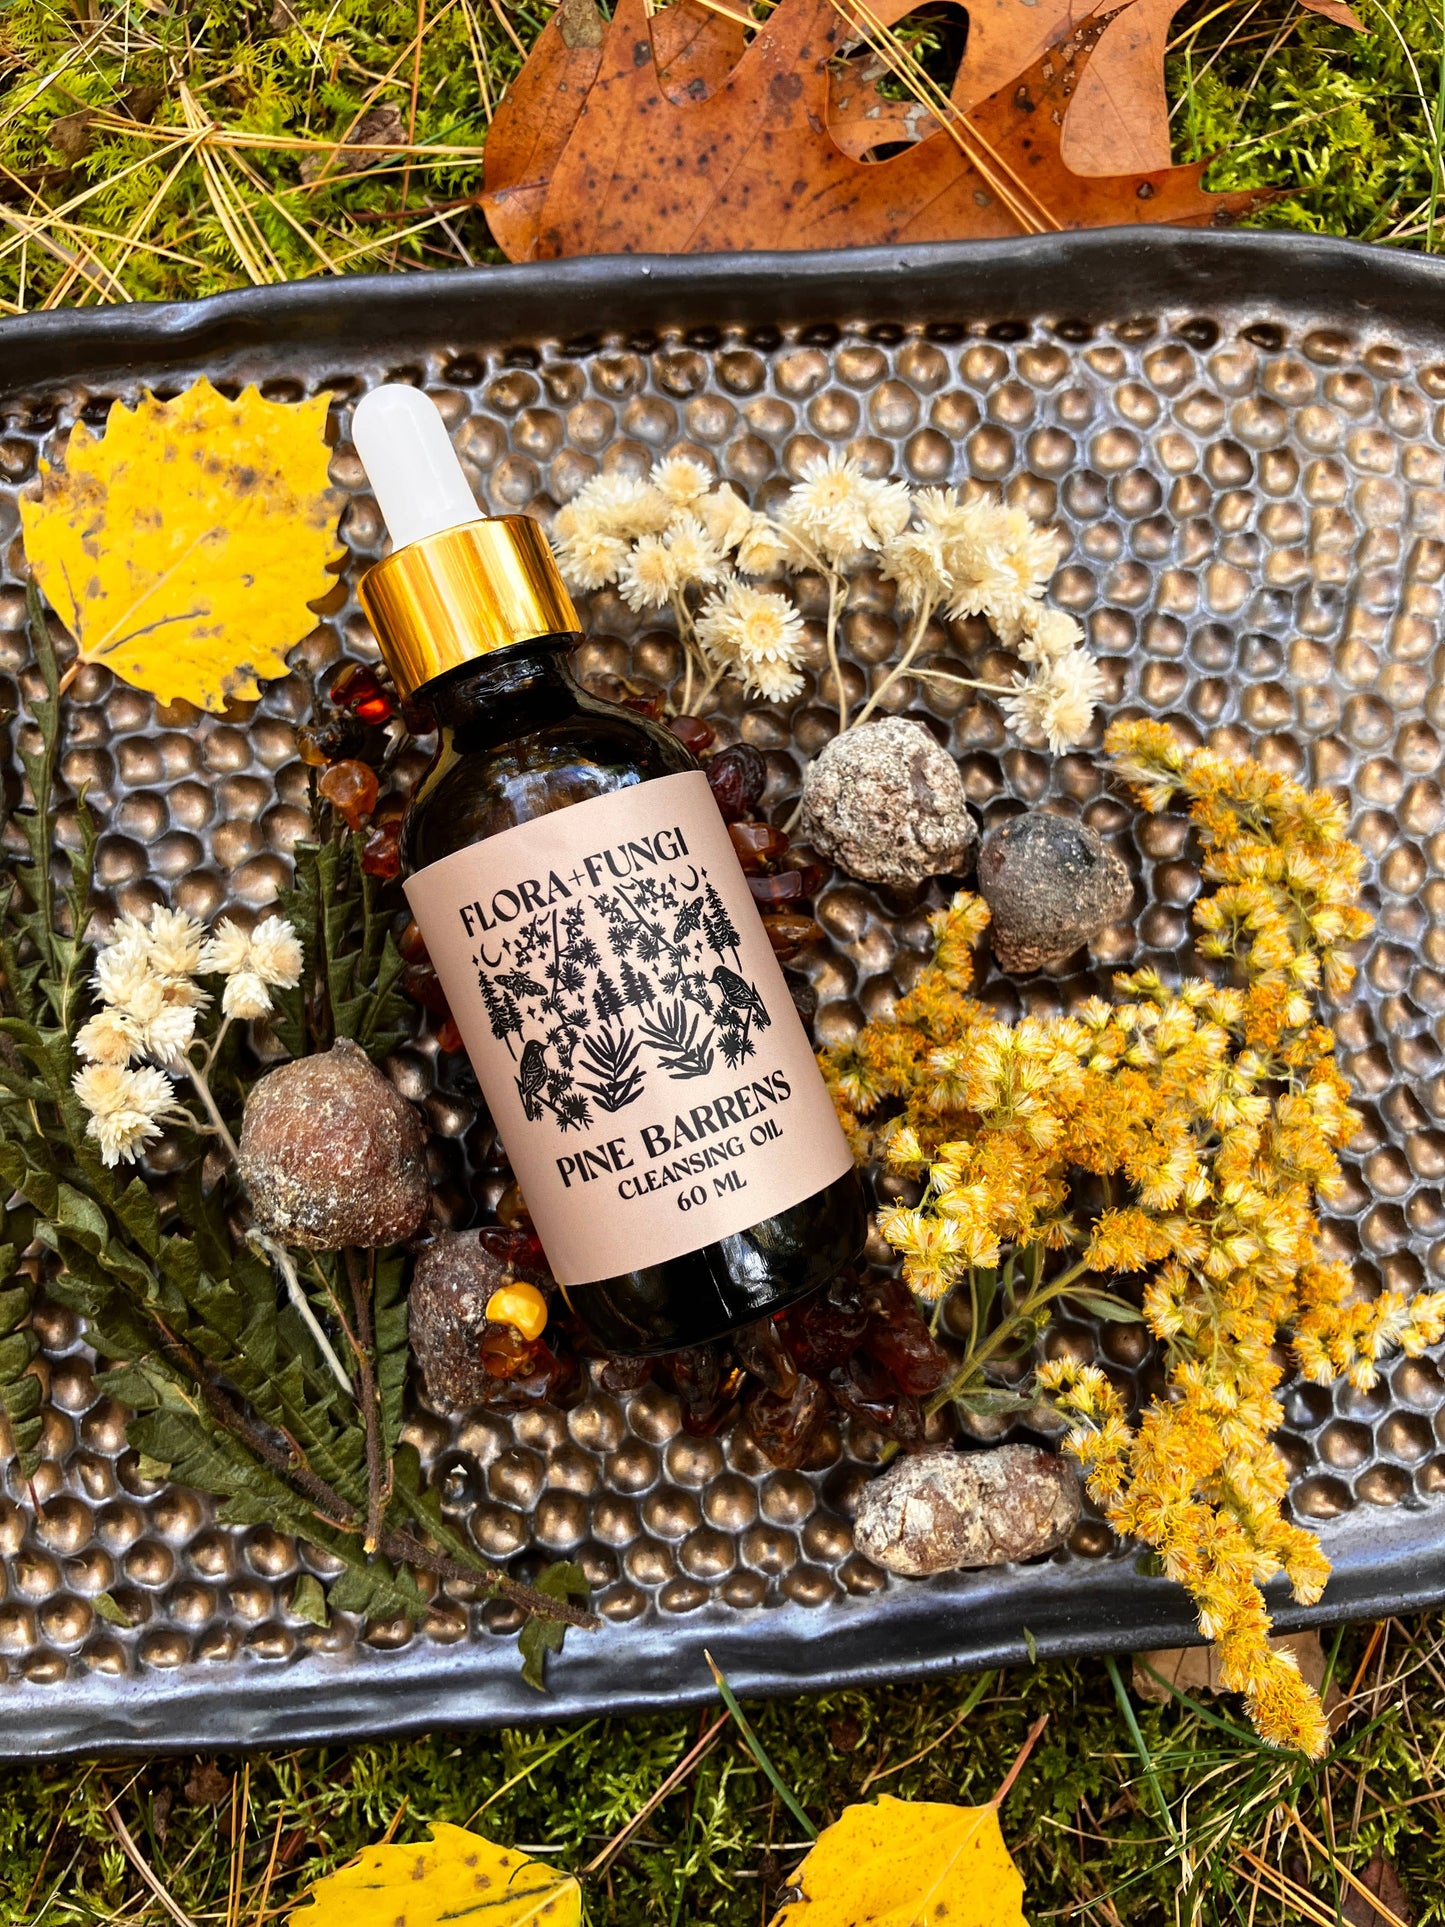 Pine Barrens Cleansing Oil